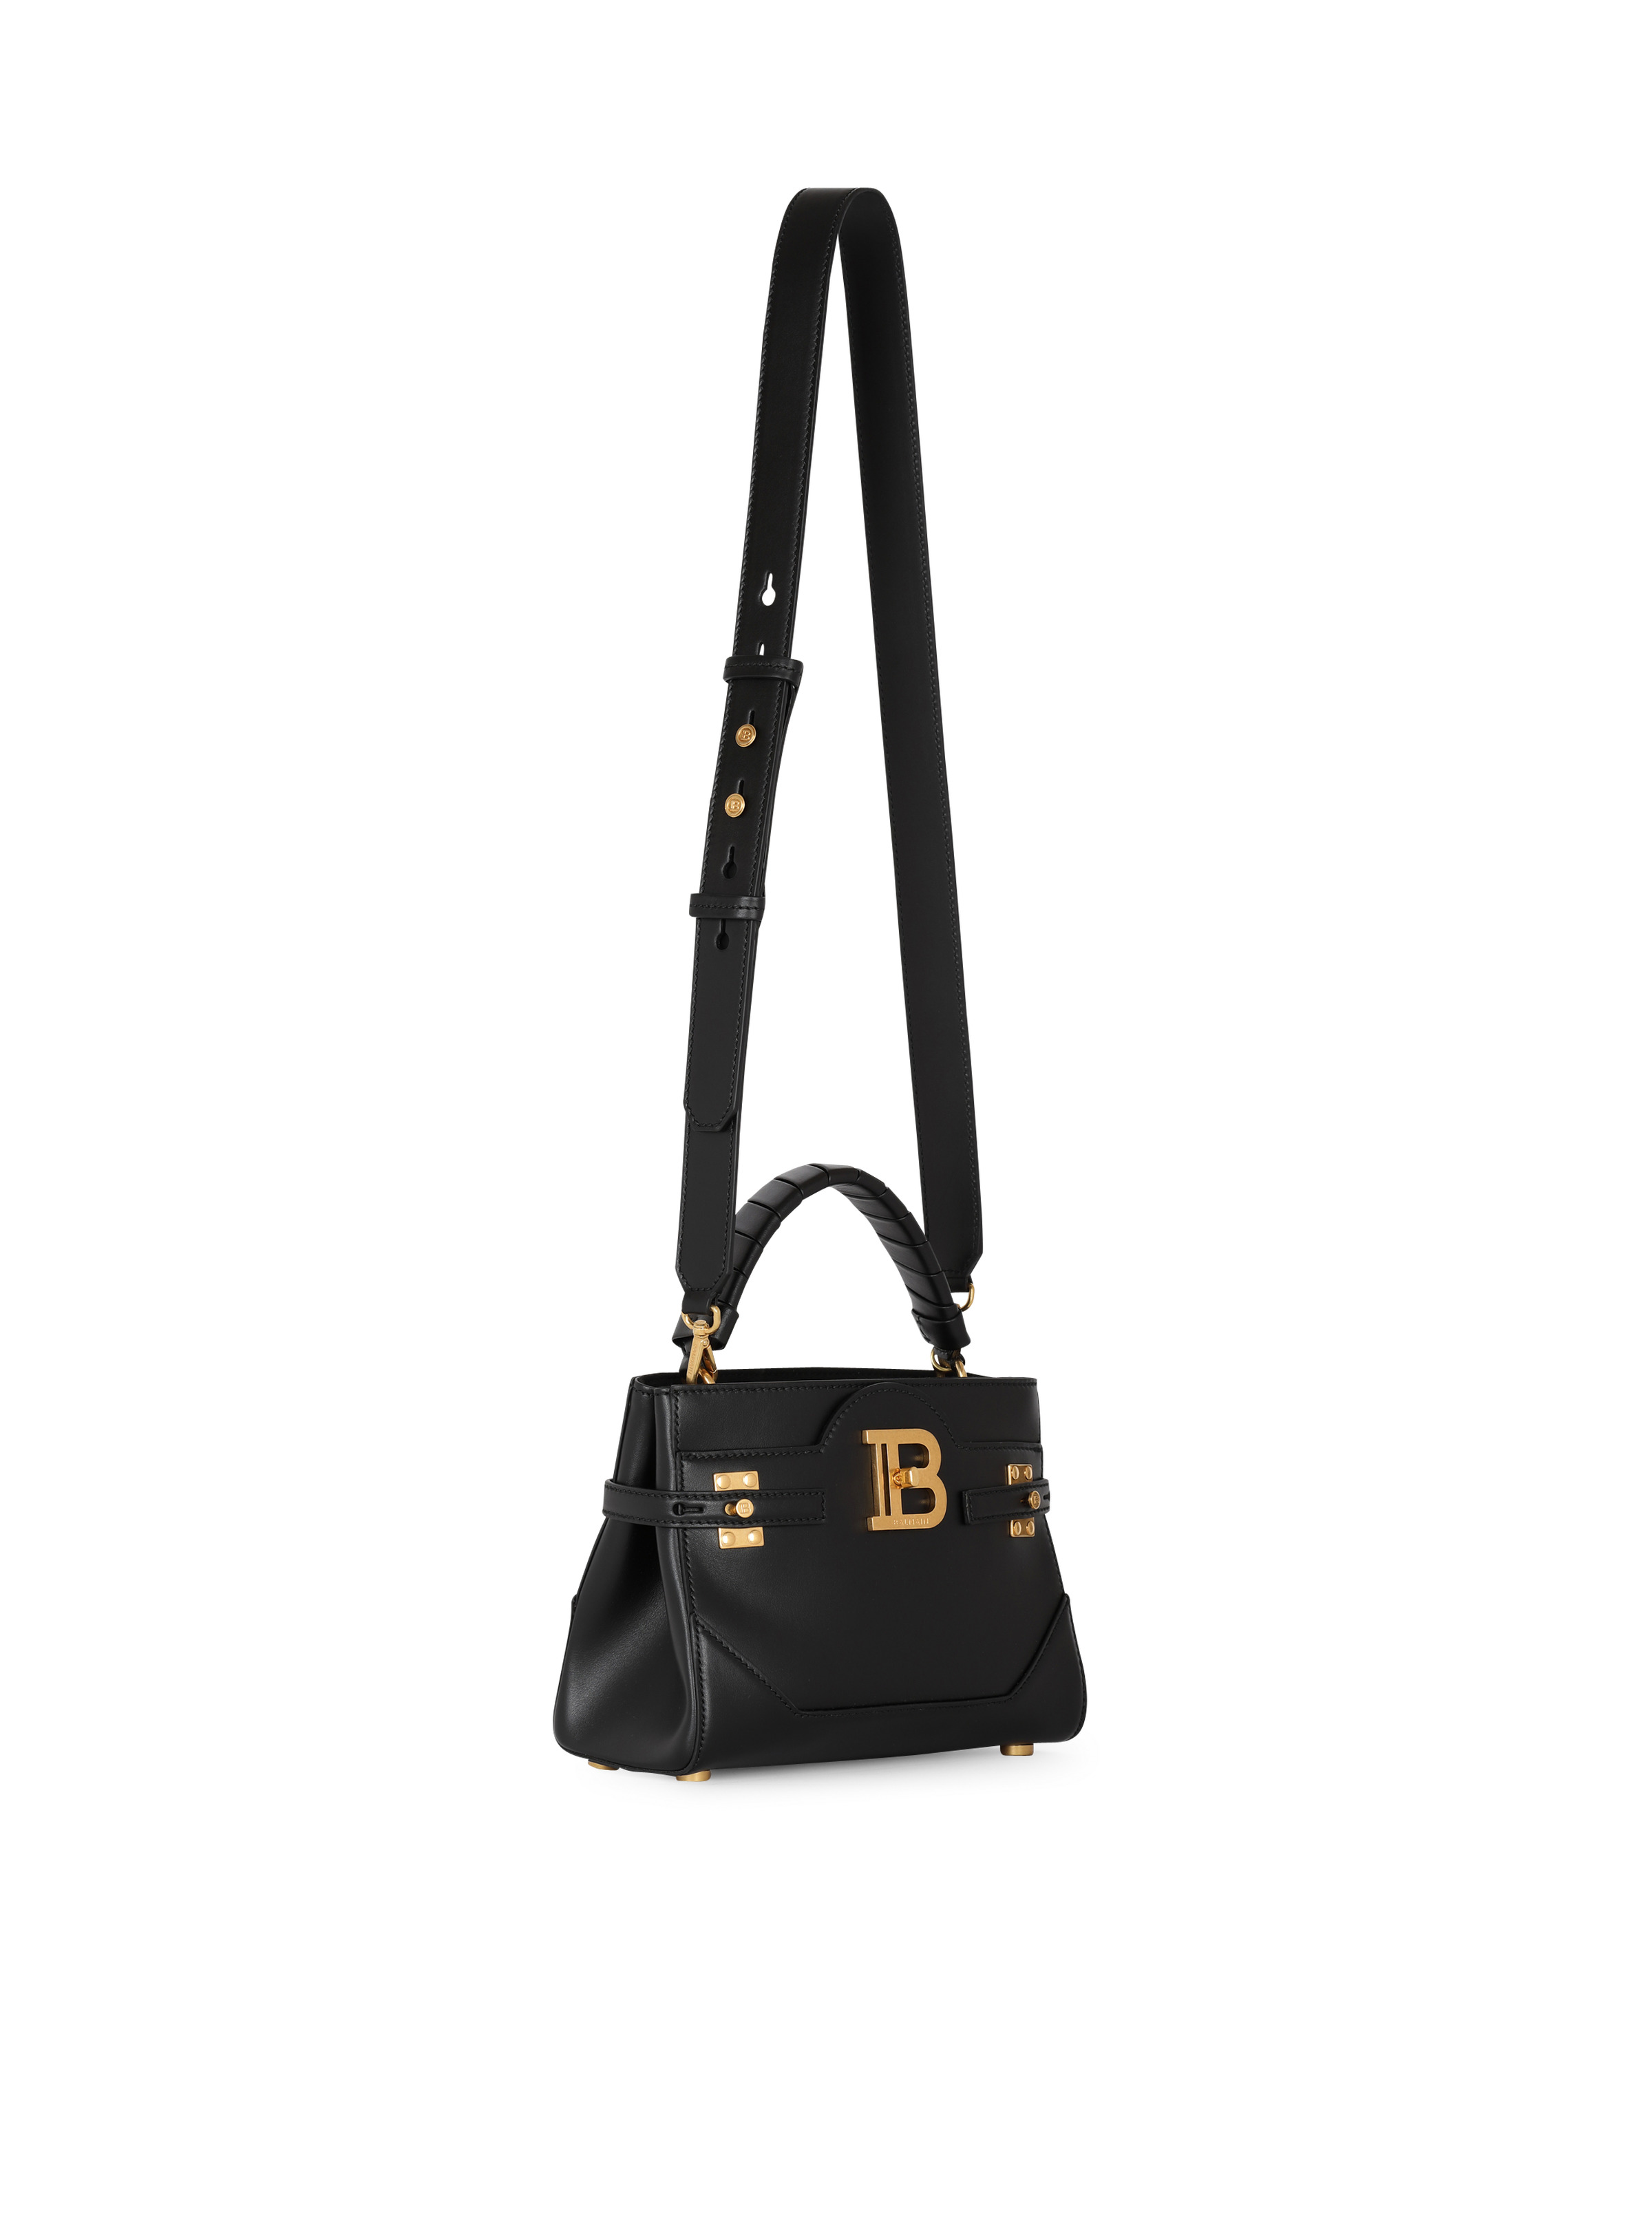 B-Buzz 22 Top Handle leather bag - 3